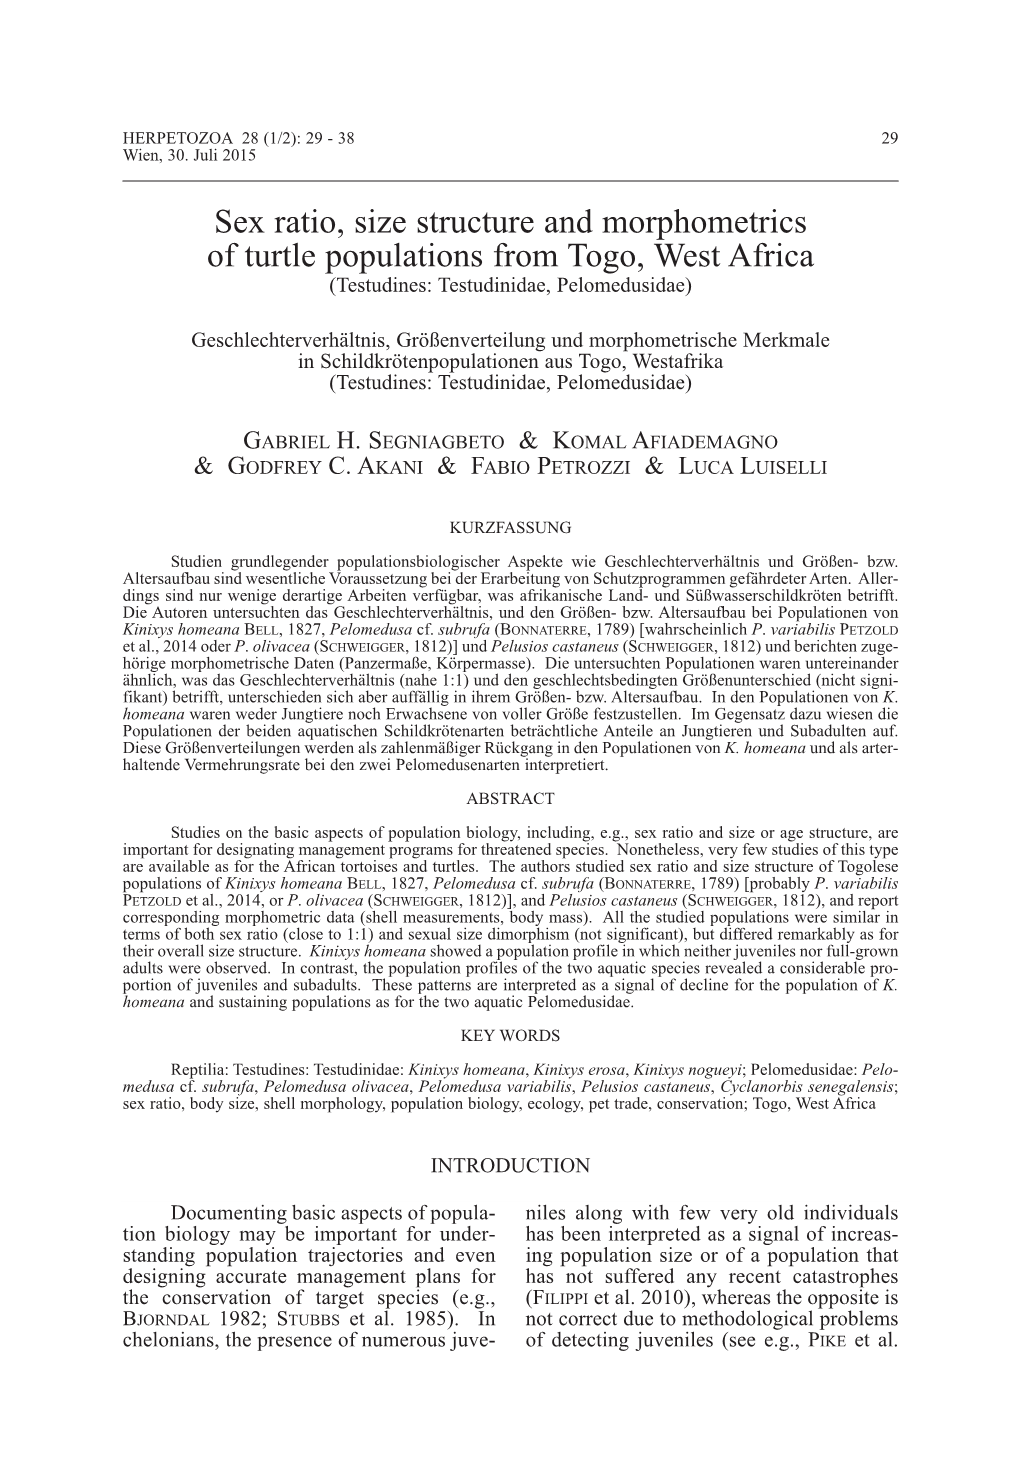 Sex Ratio, Size Structure and Morphometrics of Turtle Populations from Togo, West Africa (Testudines: Testudinidae, Pelomedusidae)